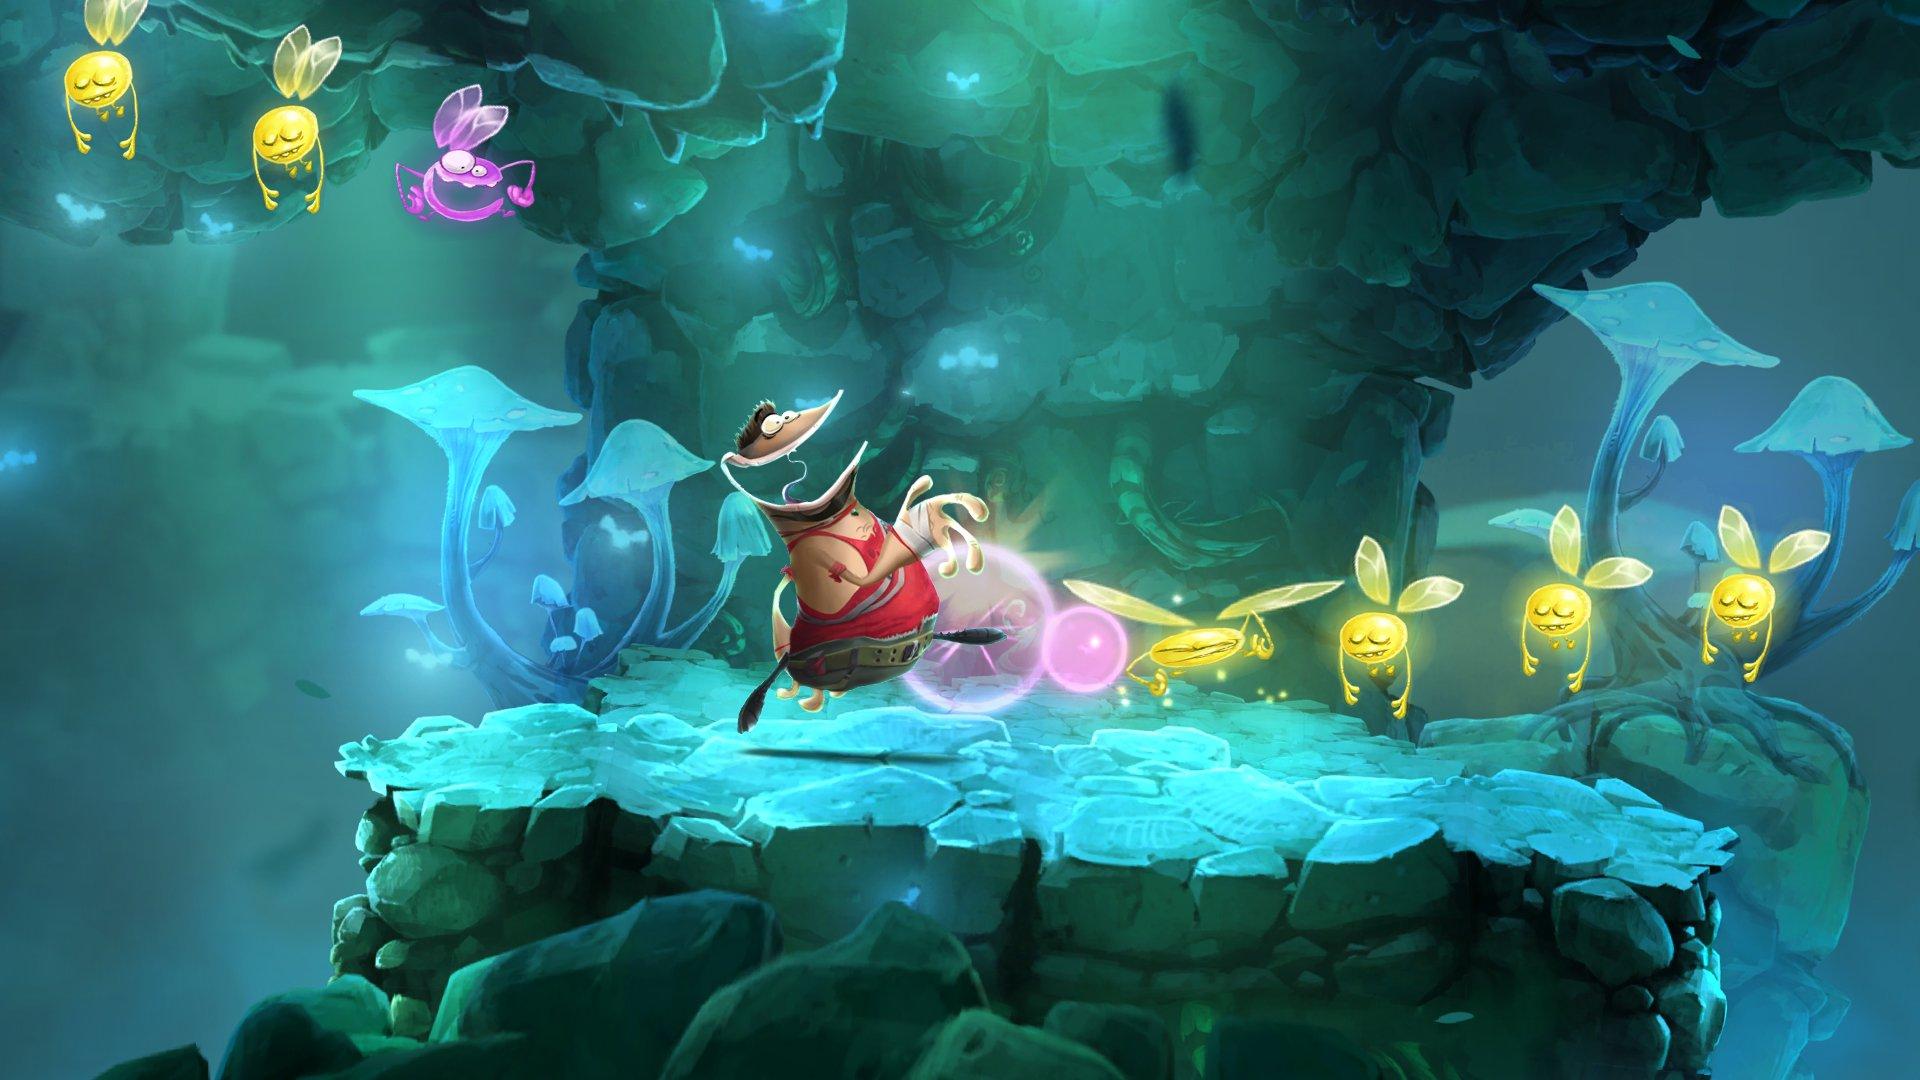 Rayman Legends release date brought forward to August